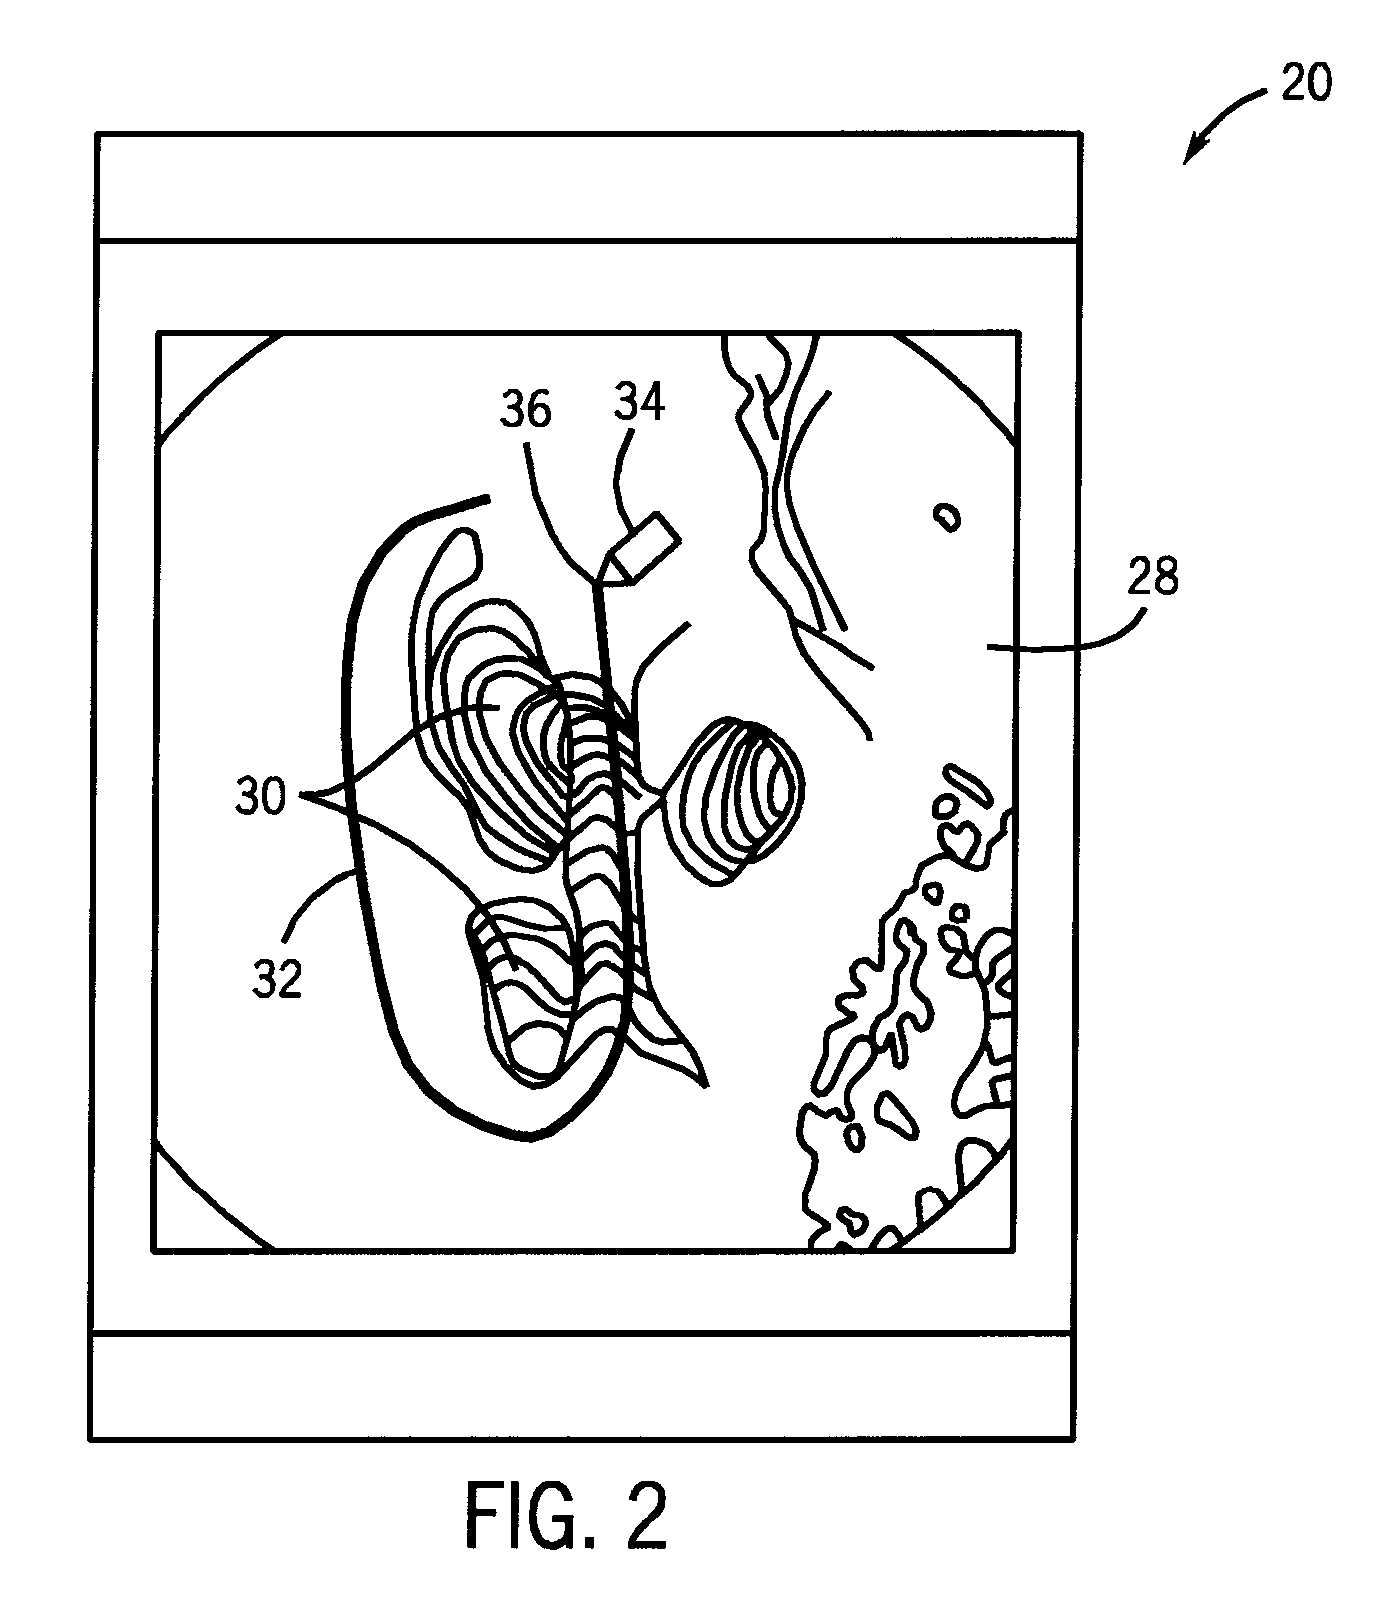 Ablation array having independently activated ablation elements